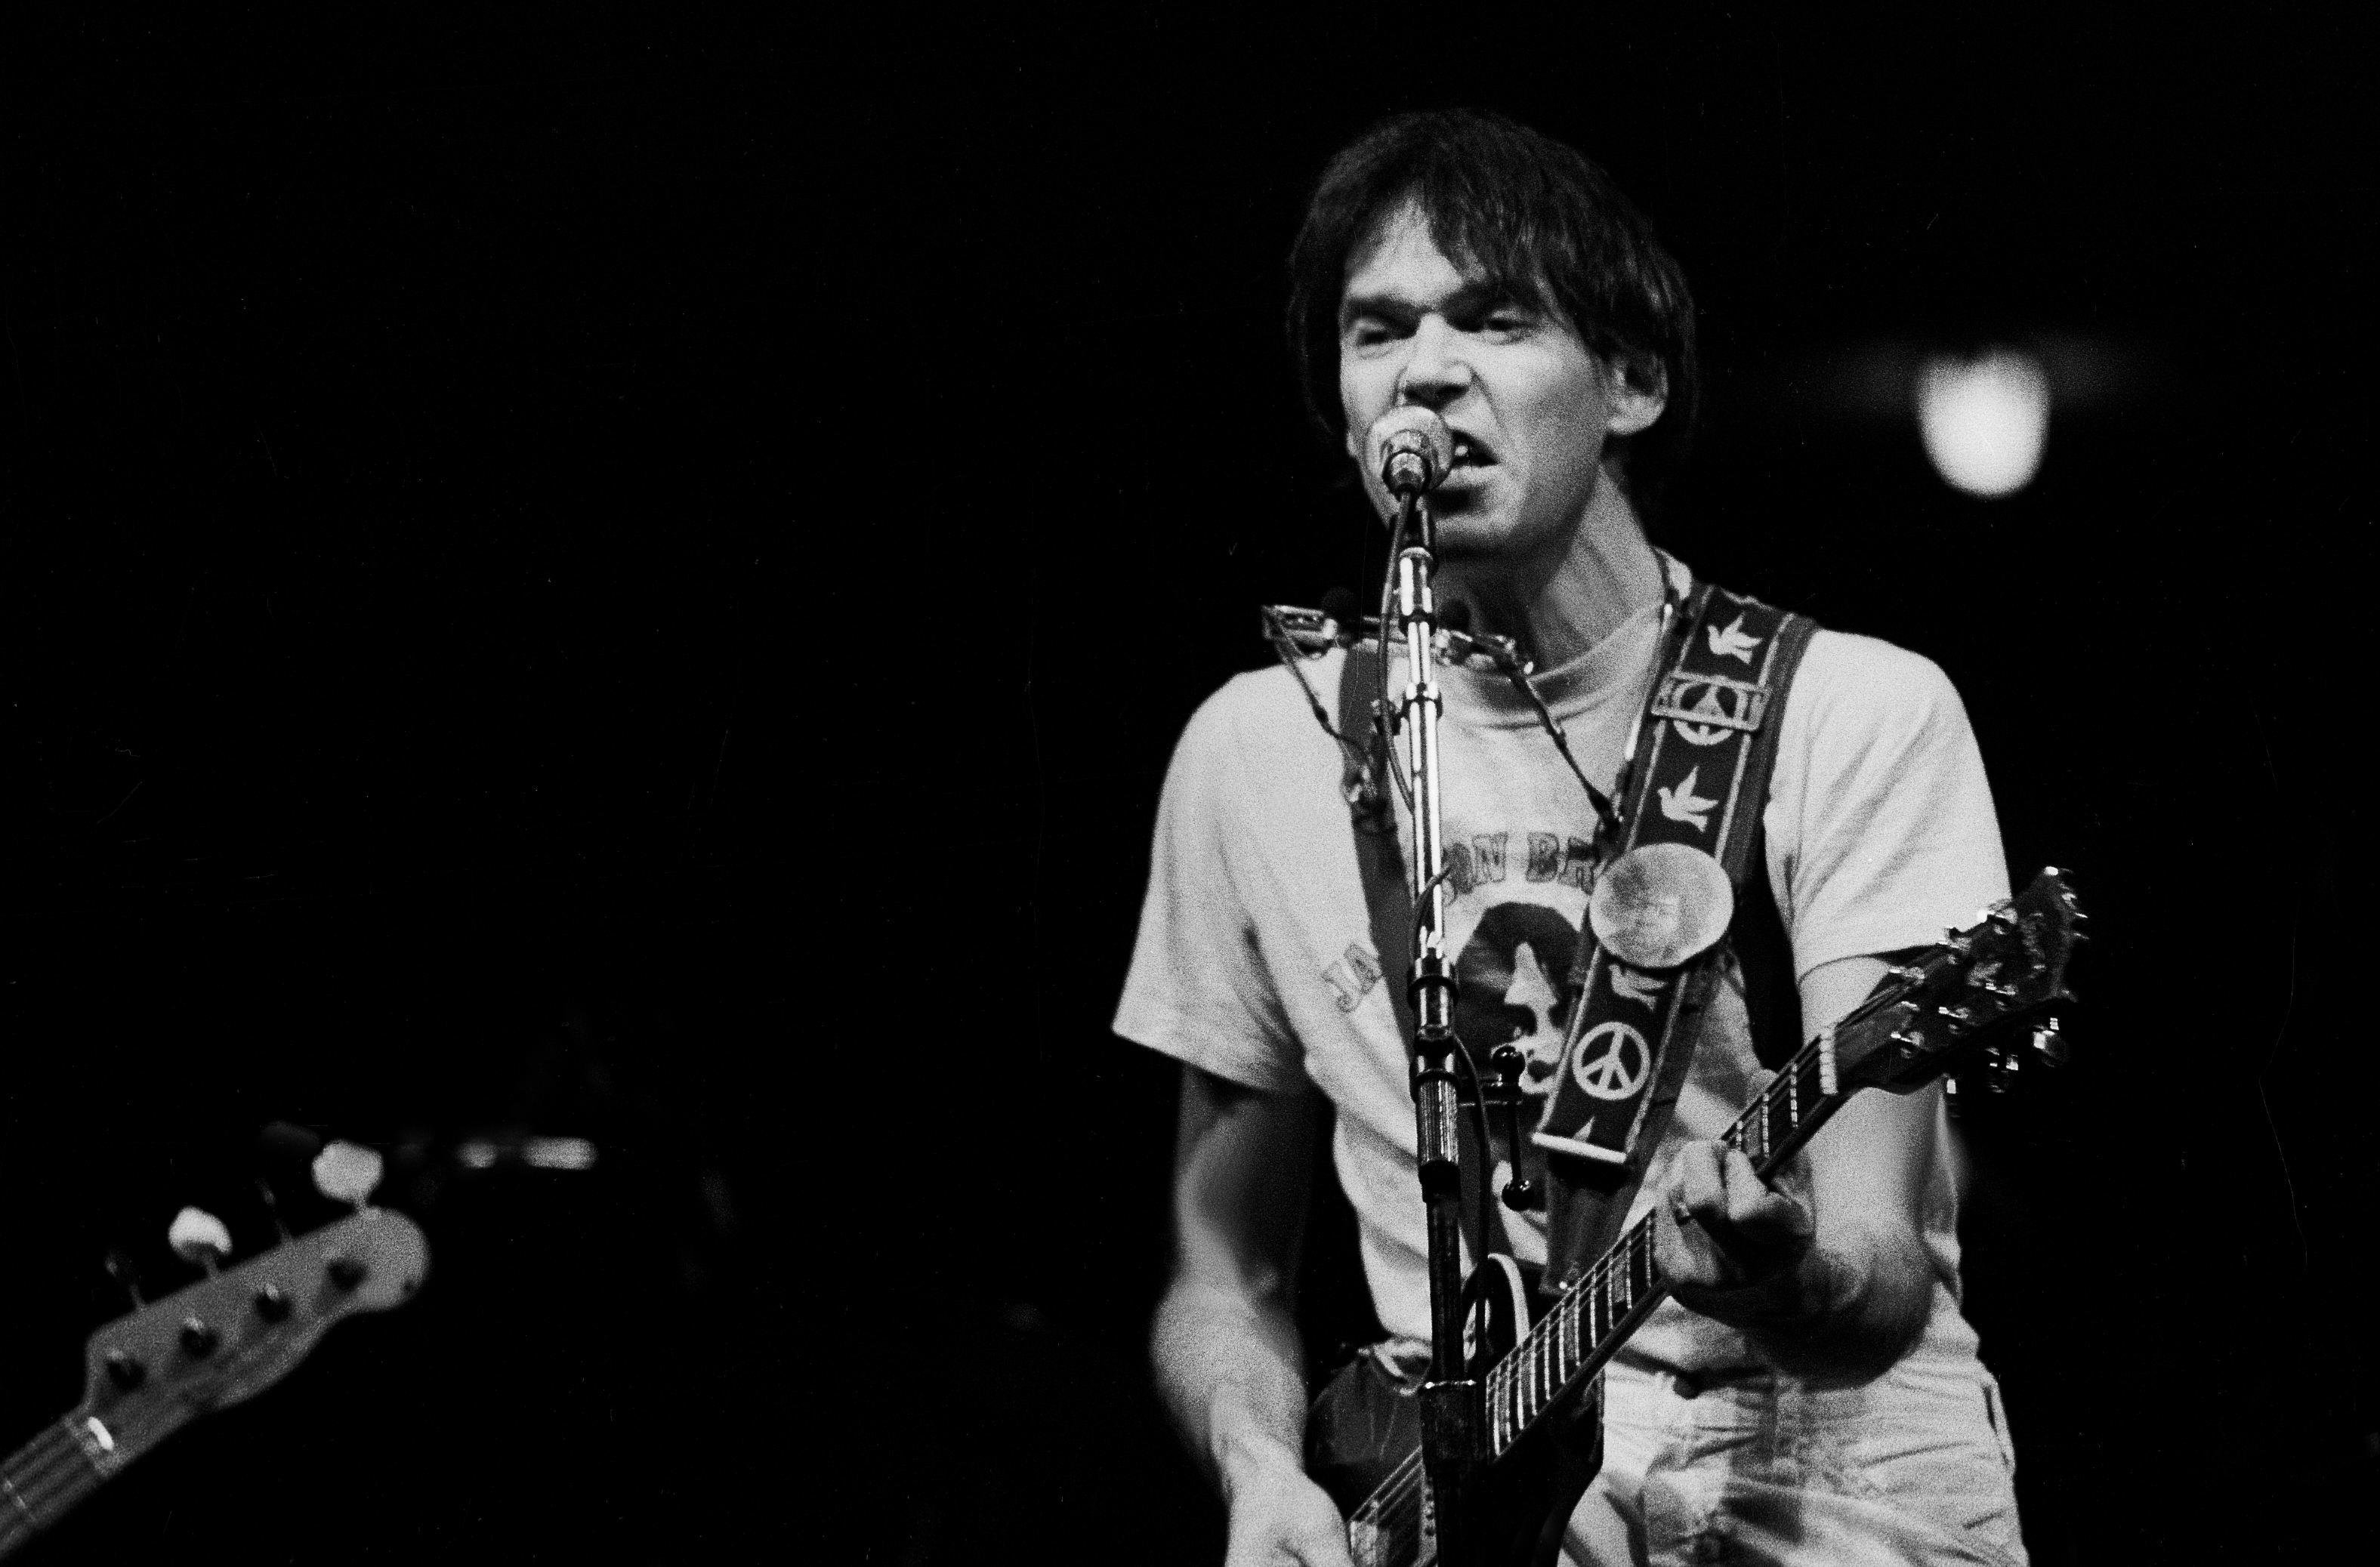 Neil Young plays guitar onstage at the Chicago Stadium, in 1978. | Source: Getty Images